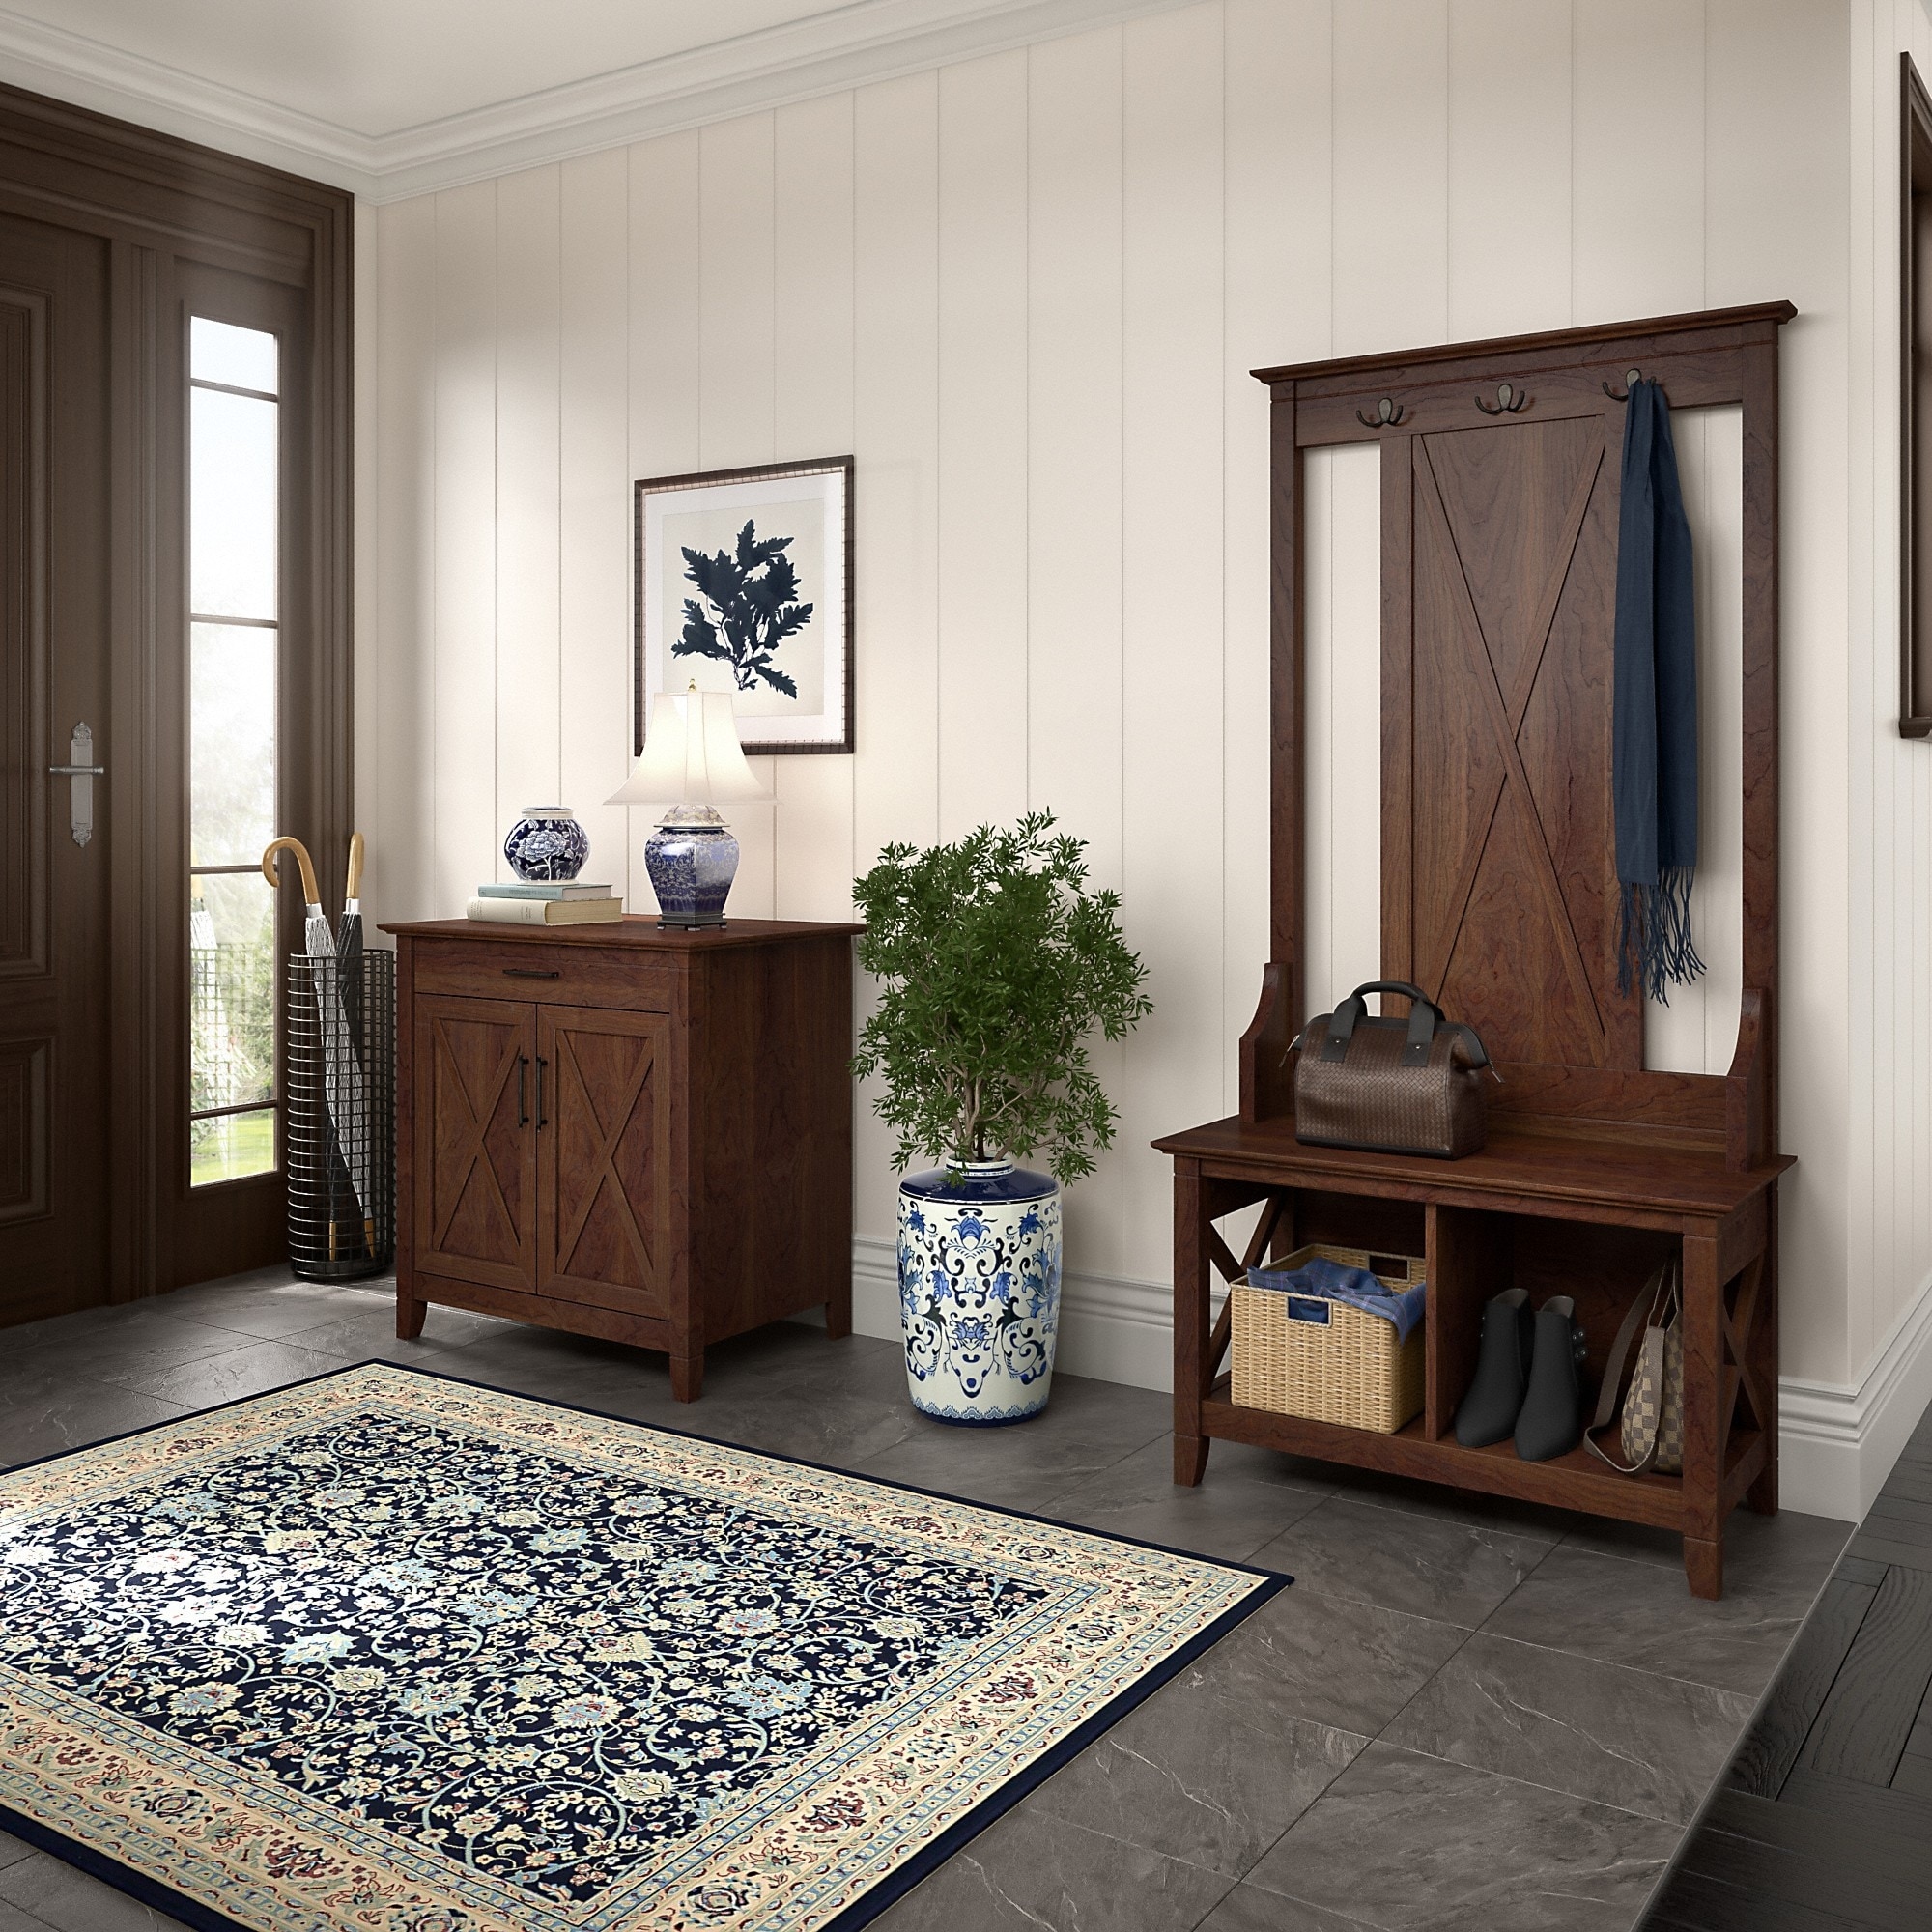 https://ak1.ostkcdn.com/images/products/is/images/direct/8c813fb243b08d253ea3d5c3b6caf668ddd48058/Key-West-Entryway-Storage-Set-with-Armoire-Cabinet-by-Bush-Furniture.jpg